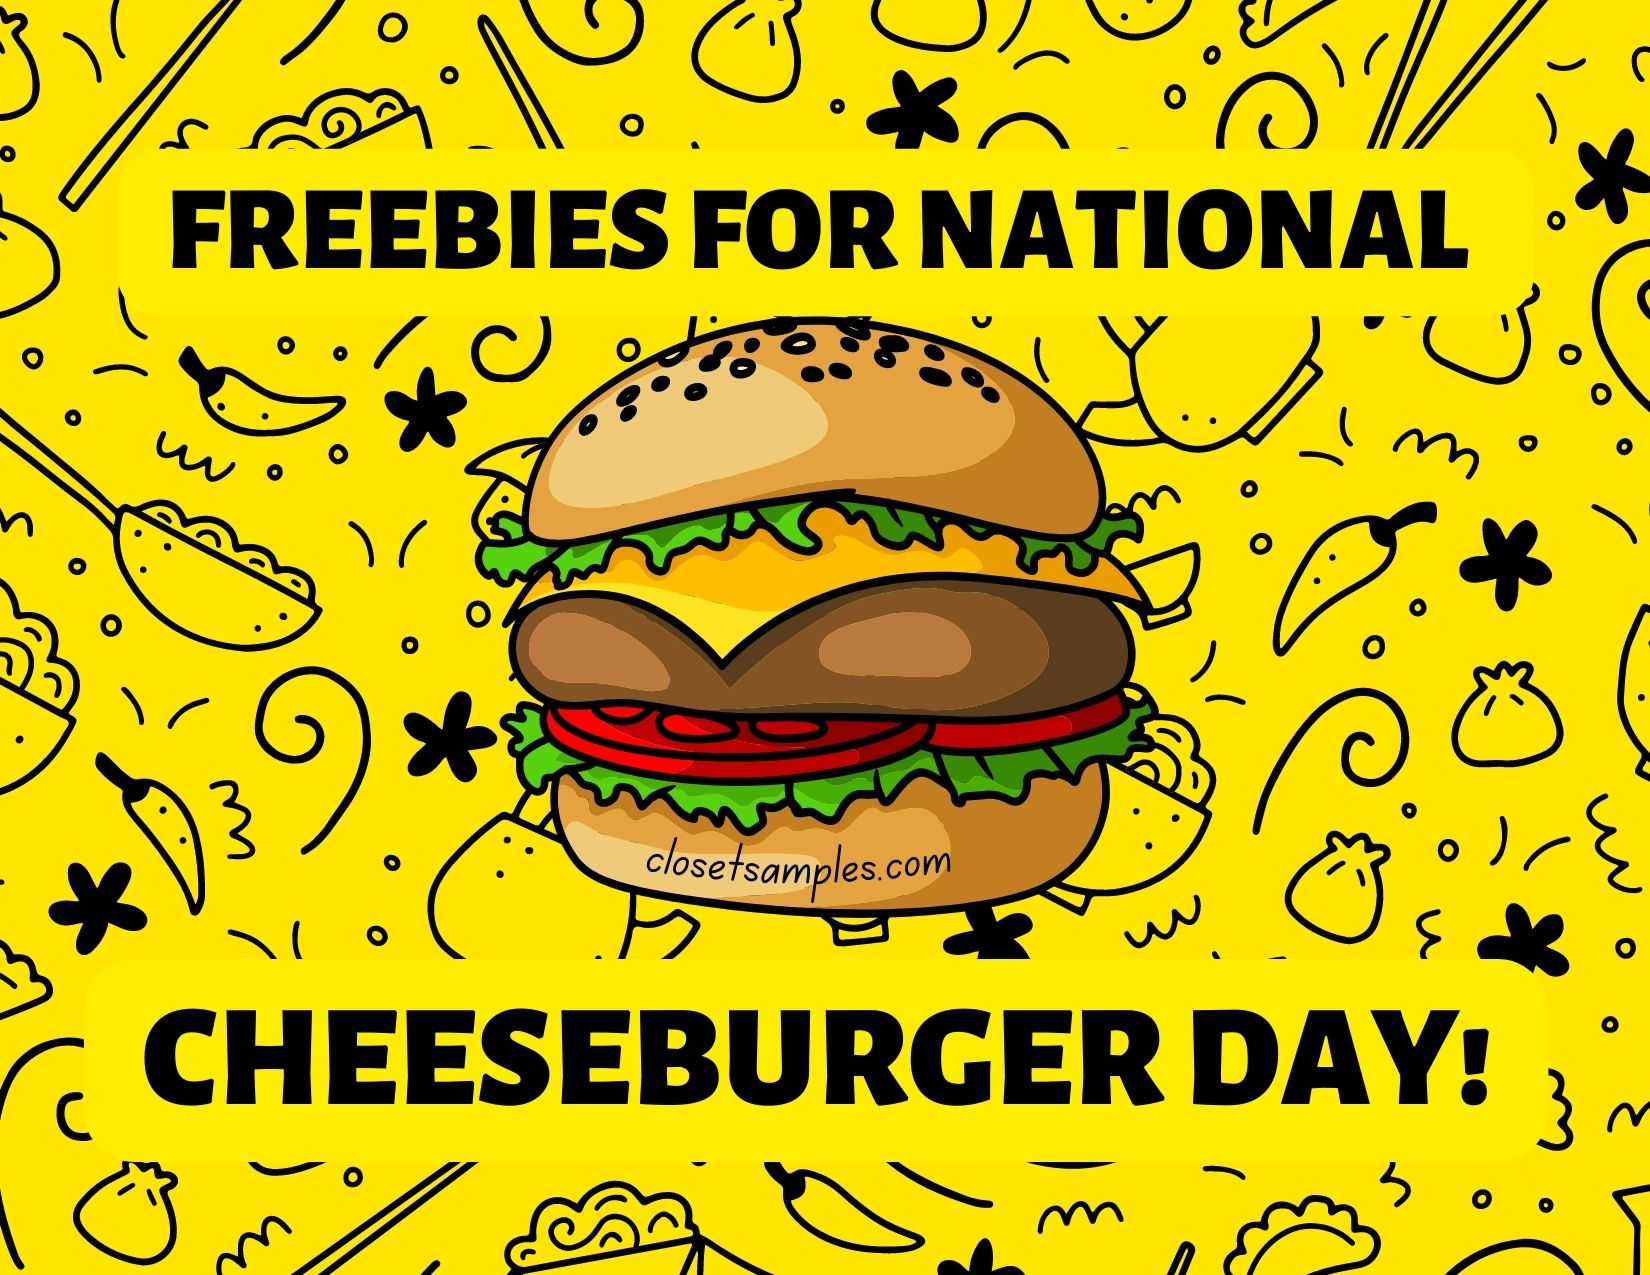 FREE Sandwiches for National C...